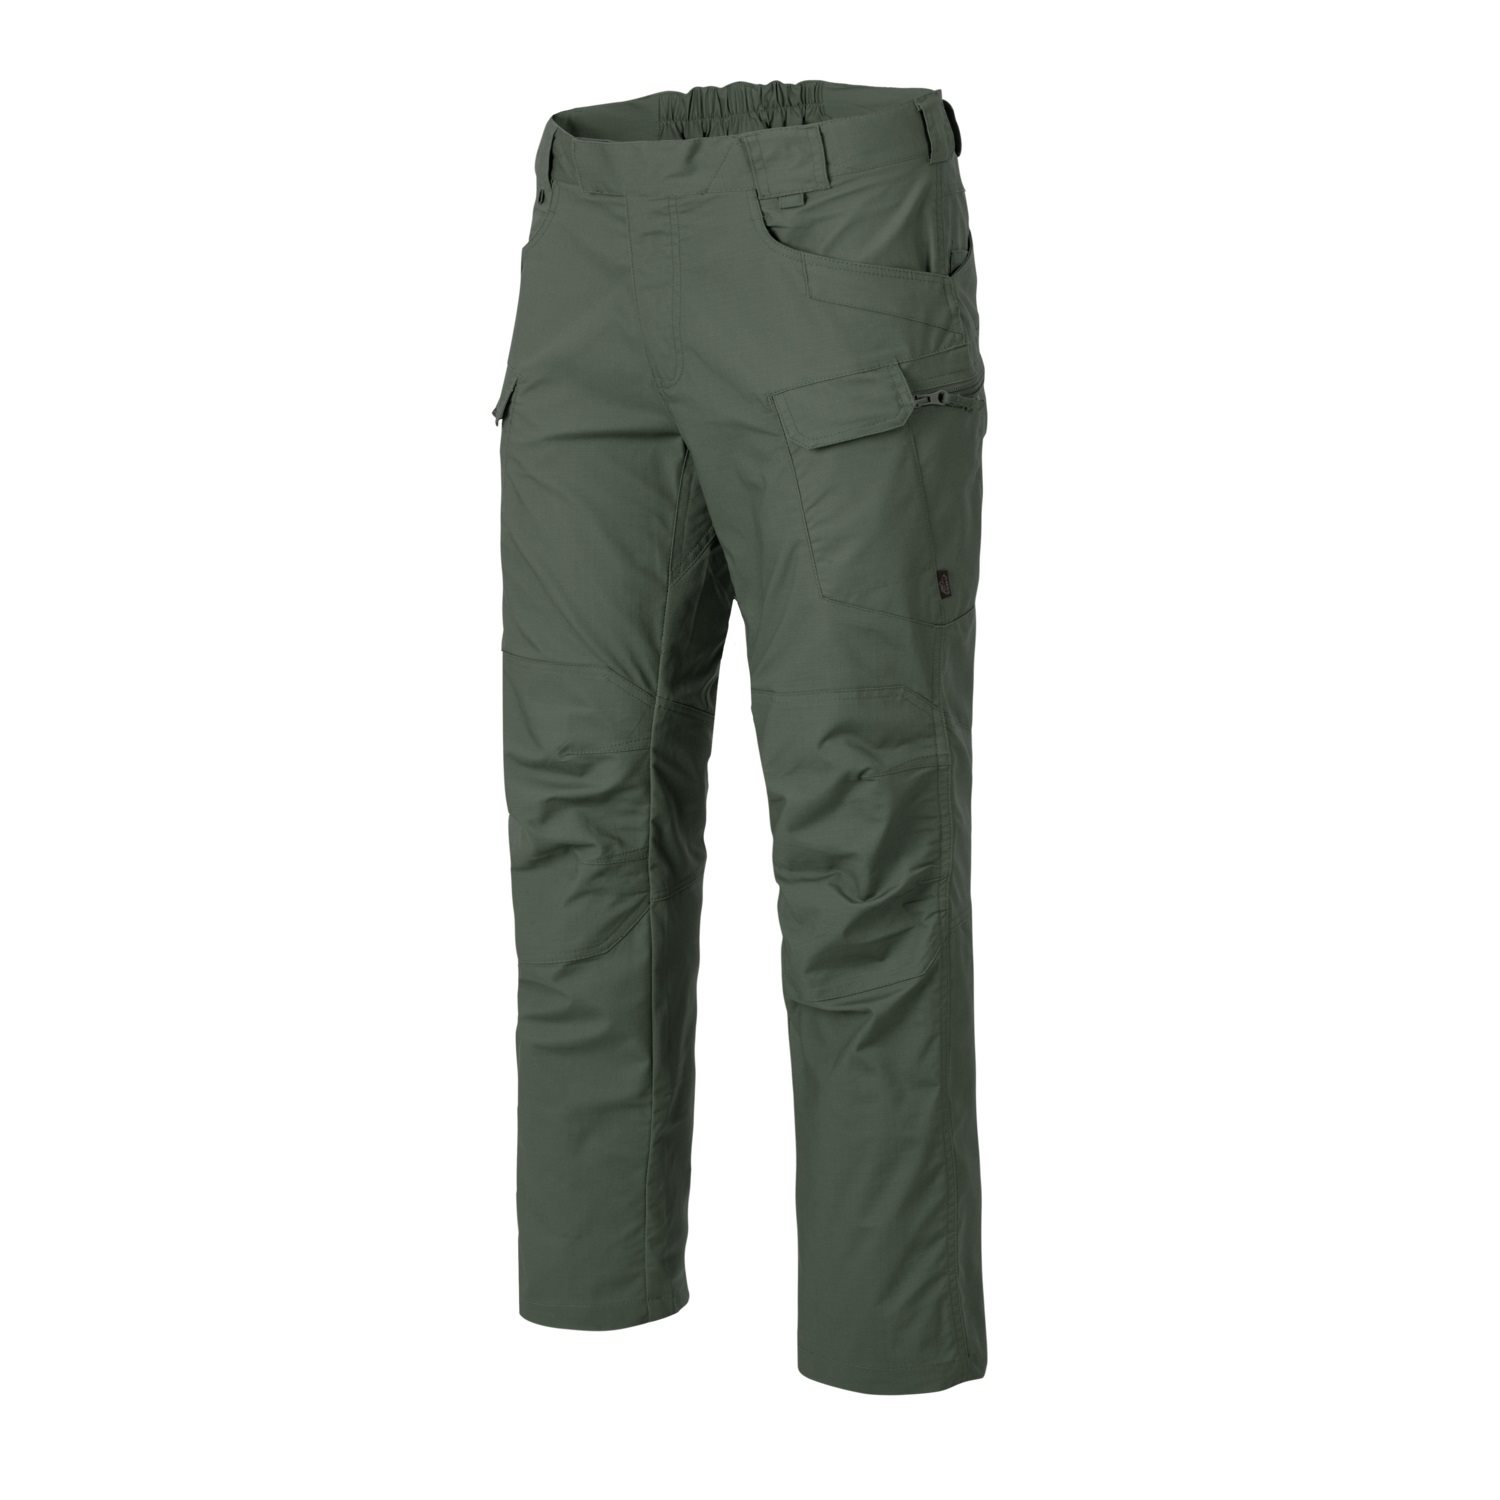 Vertx Men's Phantom OPS Tactical Pants, Olive Drab Green, 42-36 :  Amazon.in: Clothing & Accessories